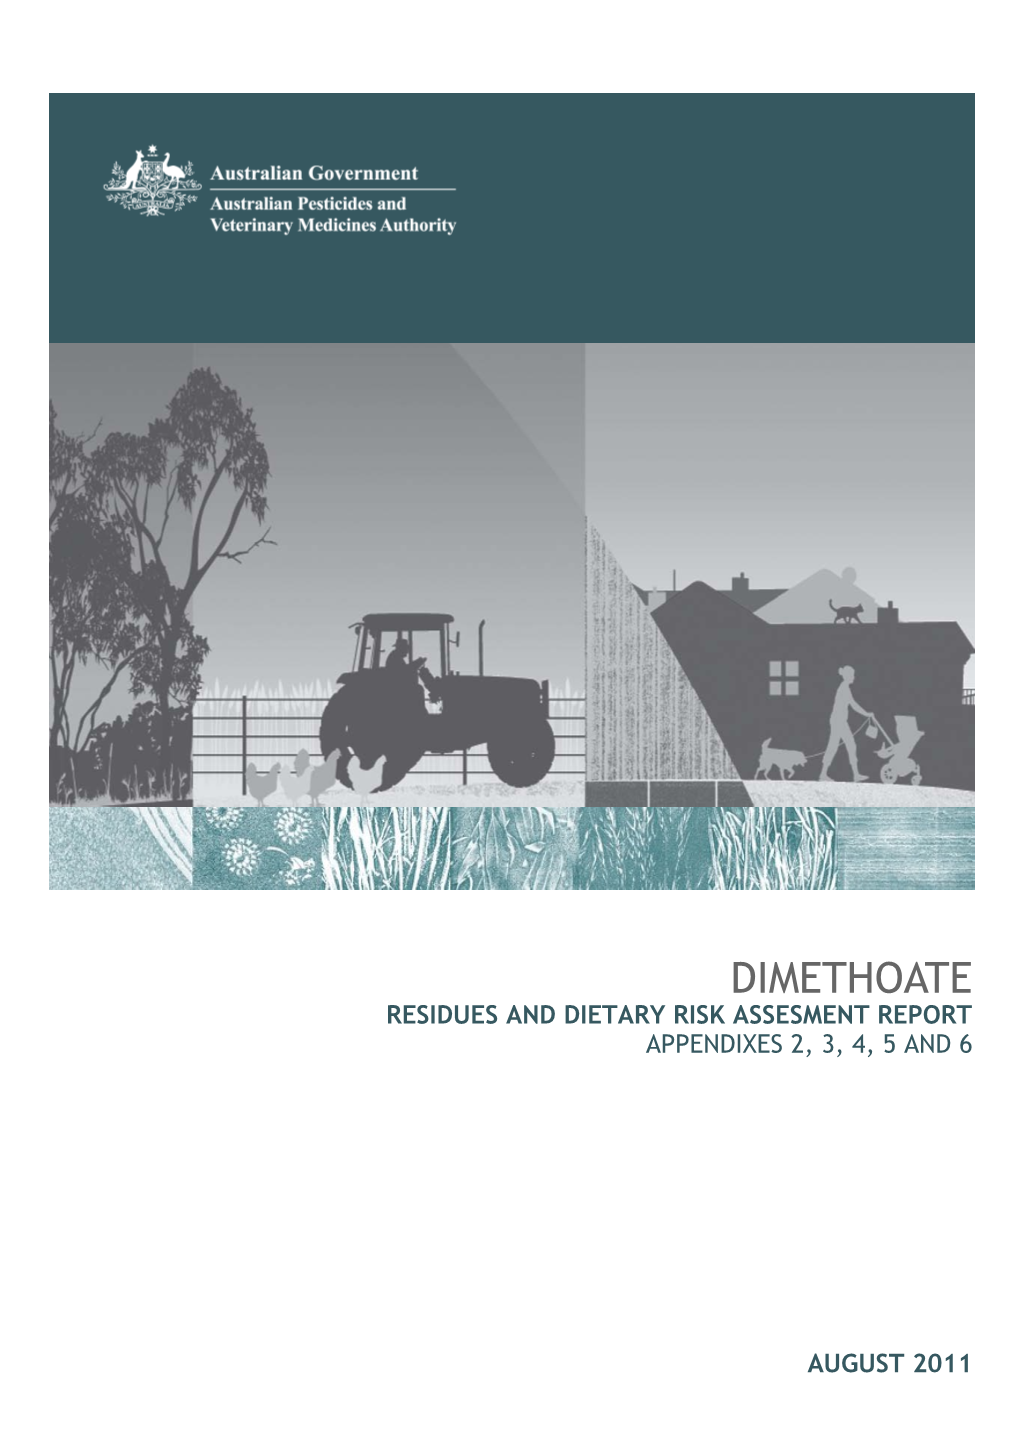 Dimethoate Residues and Dietary Risk Assessment Report - Appendixes 2, 3, 4, 5 and 6